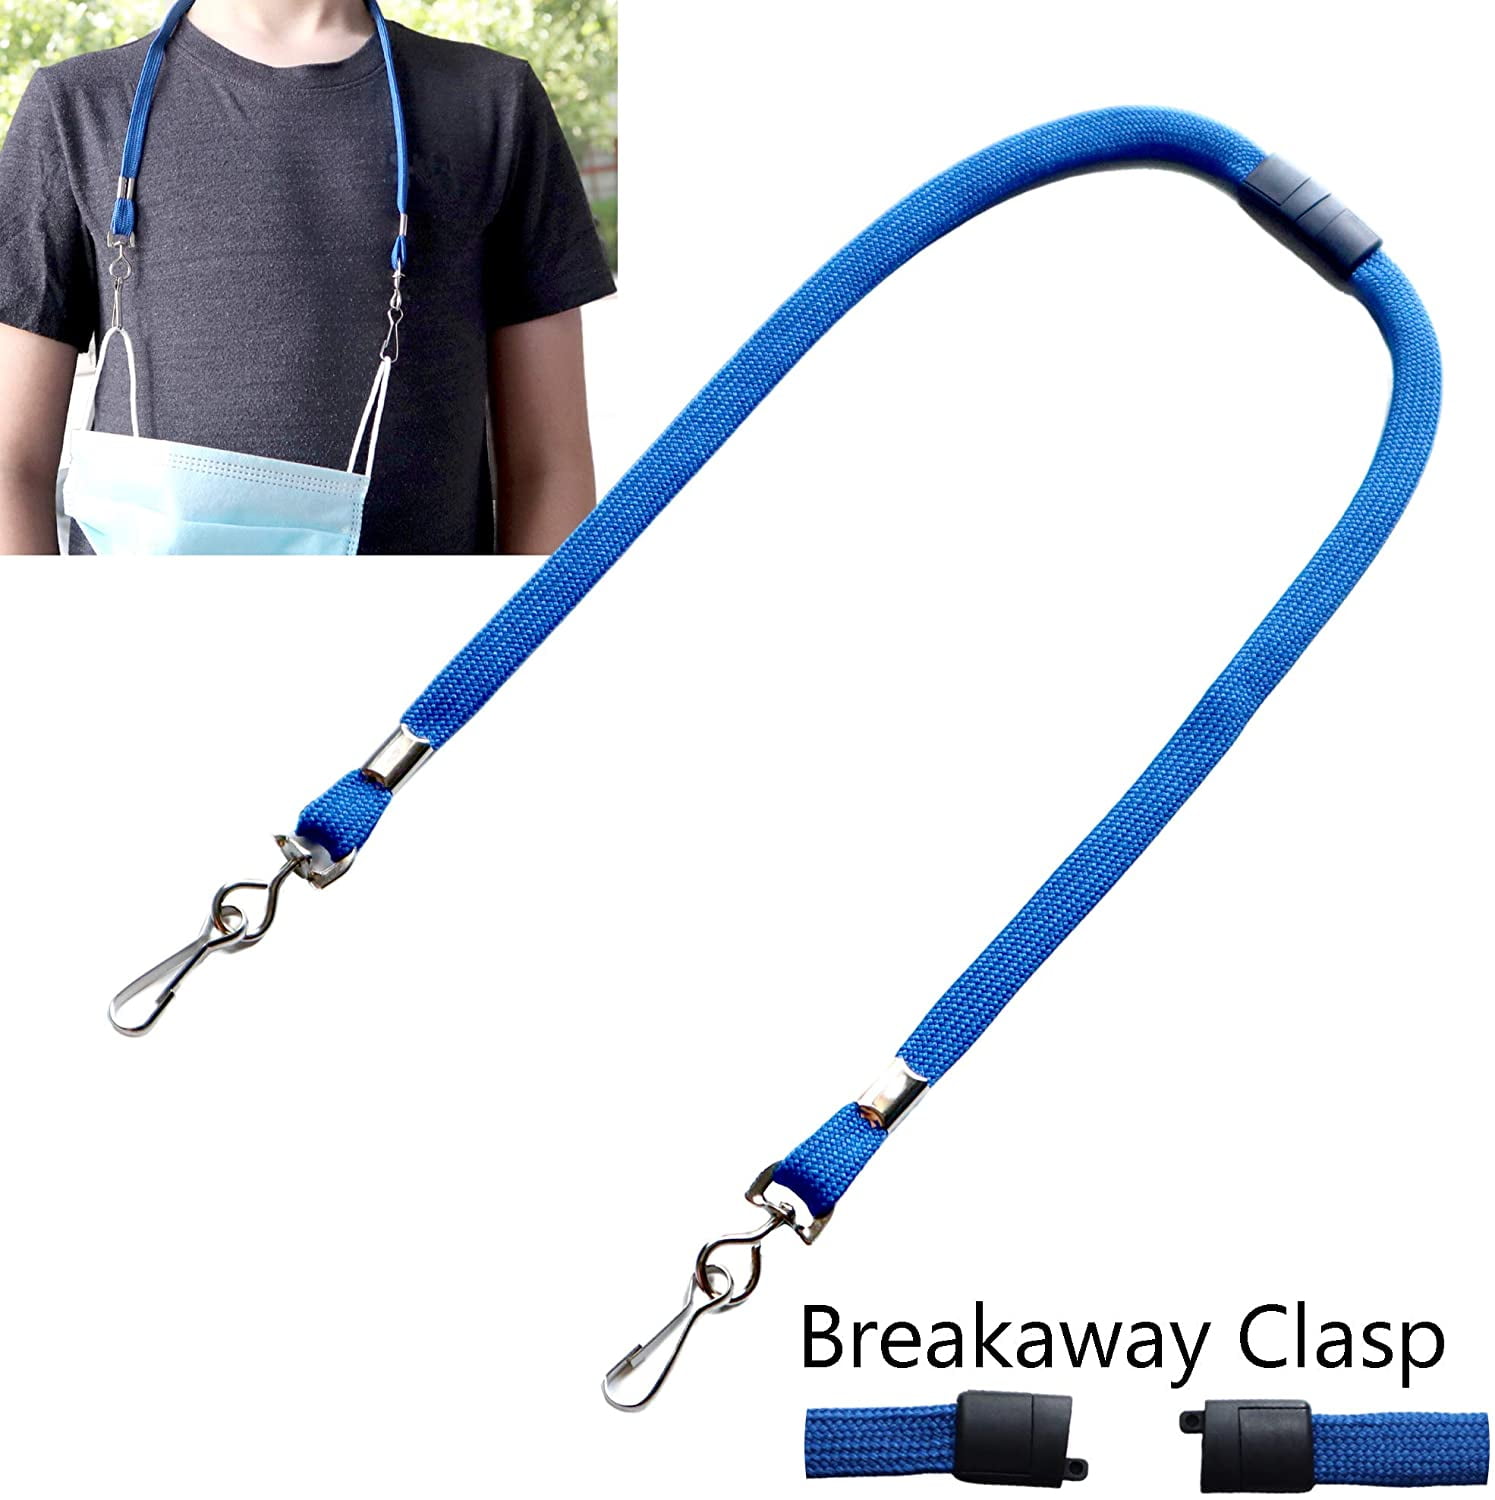 Bulk 25 Pack - Face Mask Lanyards - Kid Size with Safety Breakaway Clasp -  Small Size Ear Saver Holder with Swivel J Clips - Short 12.5 Length by  Specialist ID (Royal Blue) 